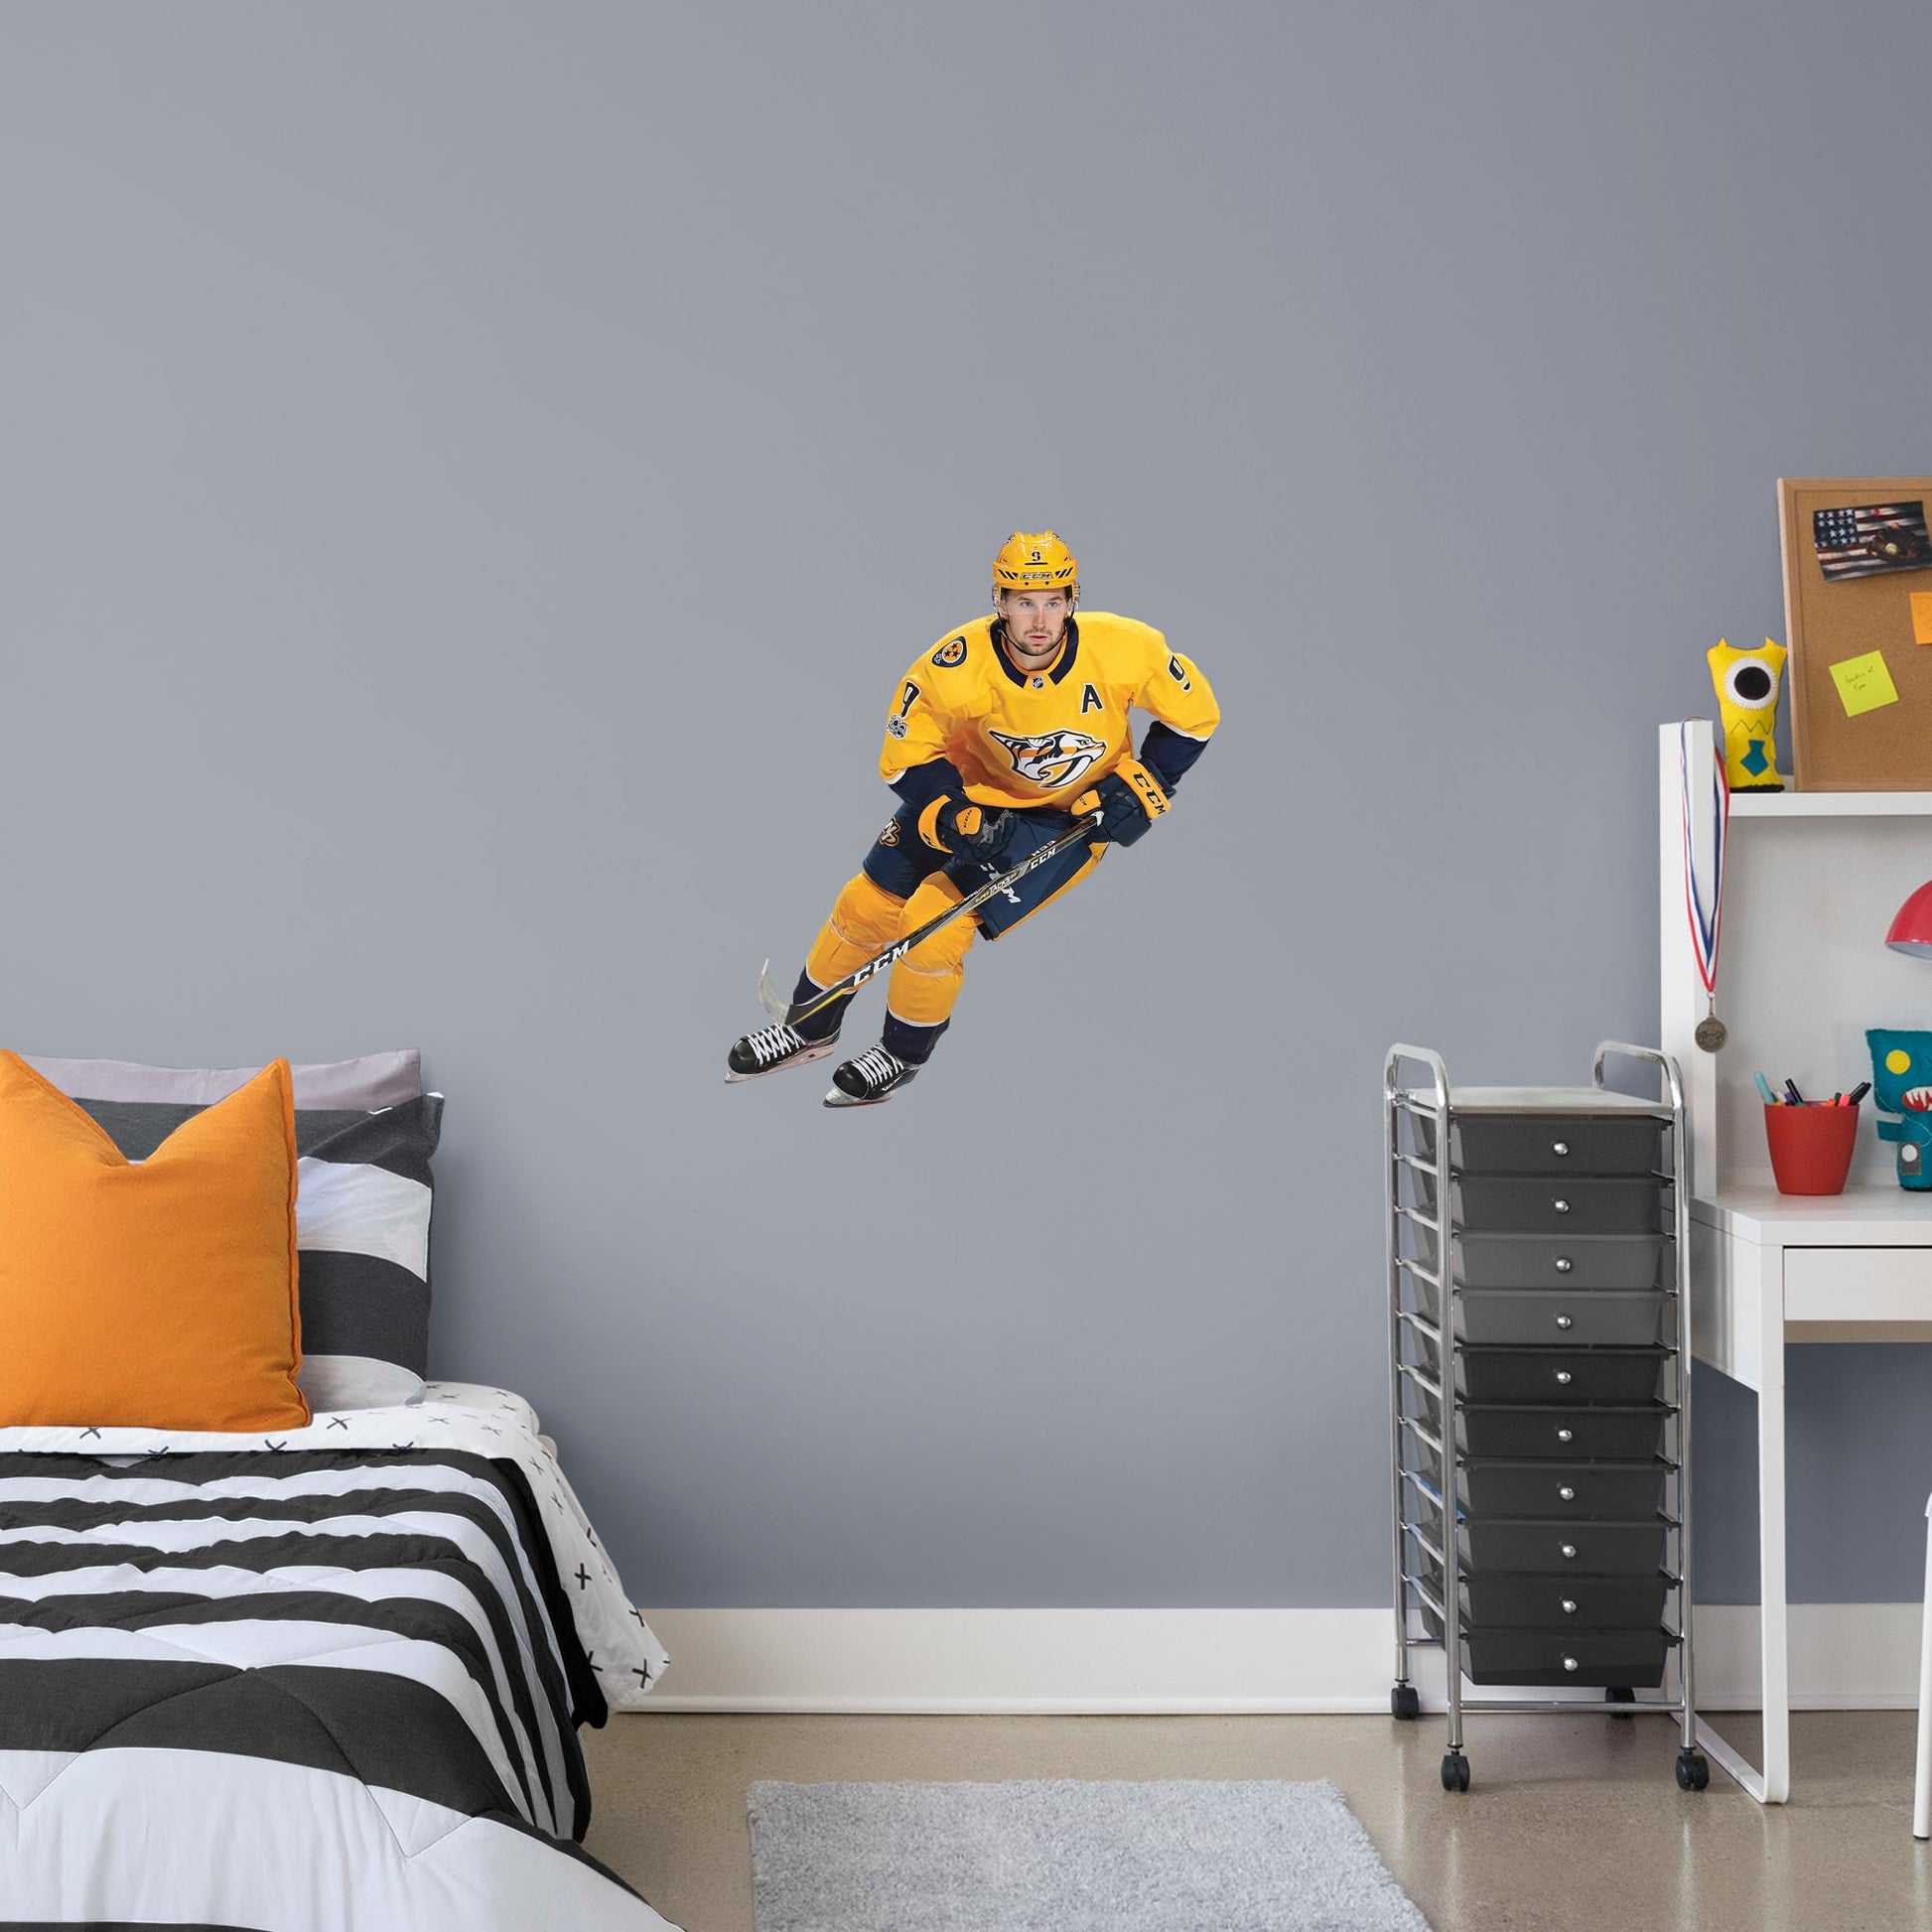 X-Large Athlete + 2 Decals (31"W x 35"H) Filip Forsberg has been a force in the NHL since he was first drafted in 2012 and now you can bring him to life in your home with this Officially Licensed NHL Removable Wall Decal! Pictured here in action on the ice, this durable and reusable wall decal is sure to standout in your bedroom, office, or fan room!